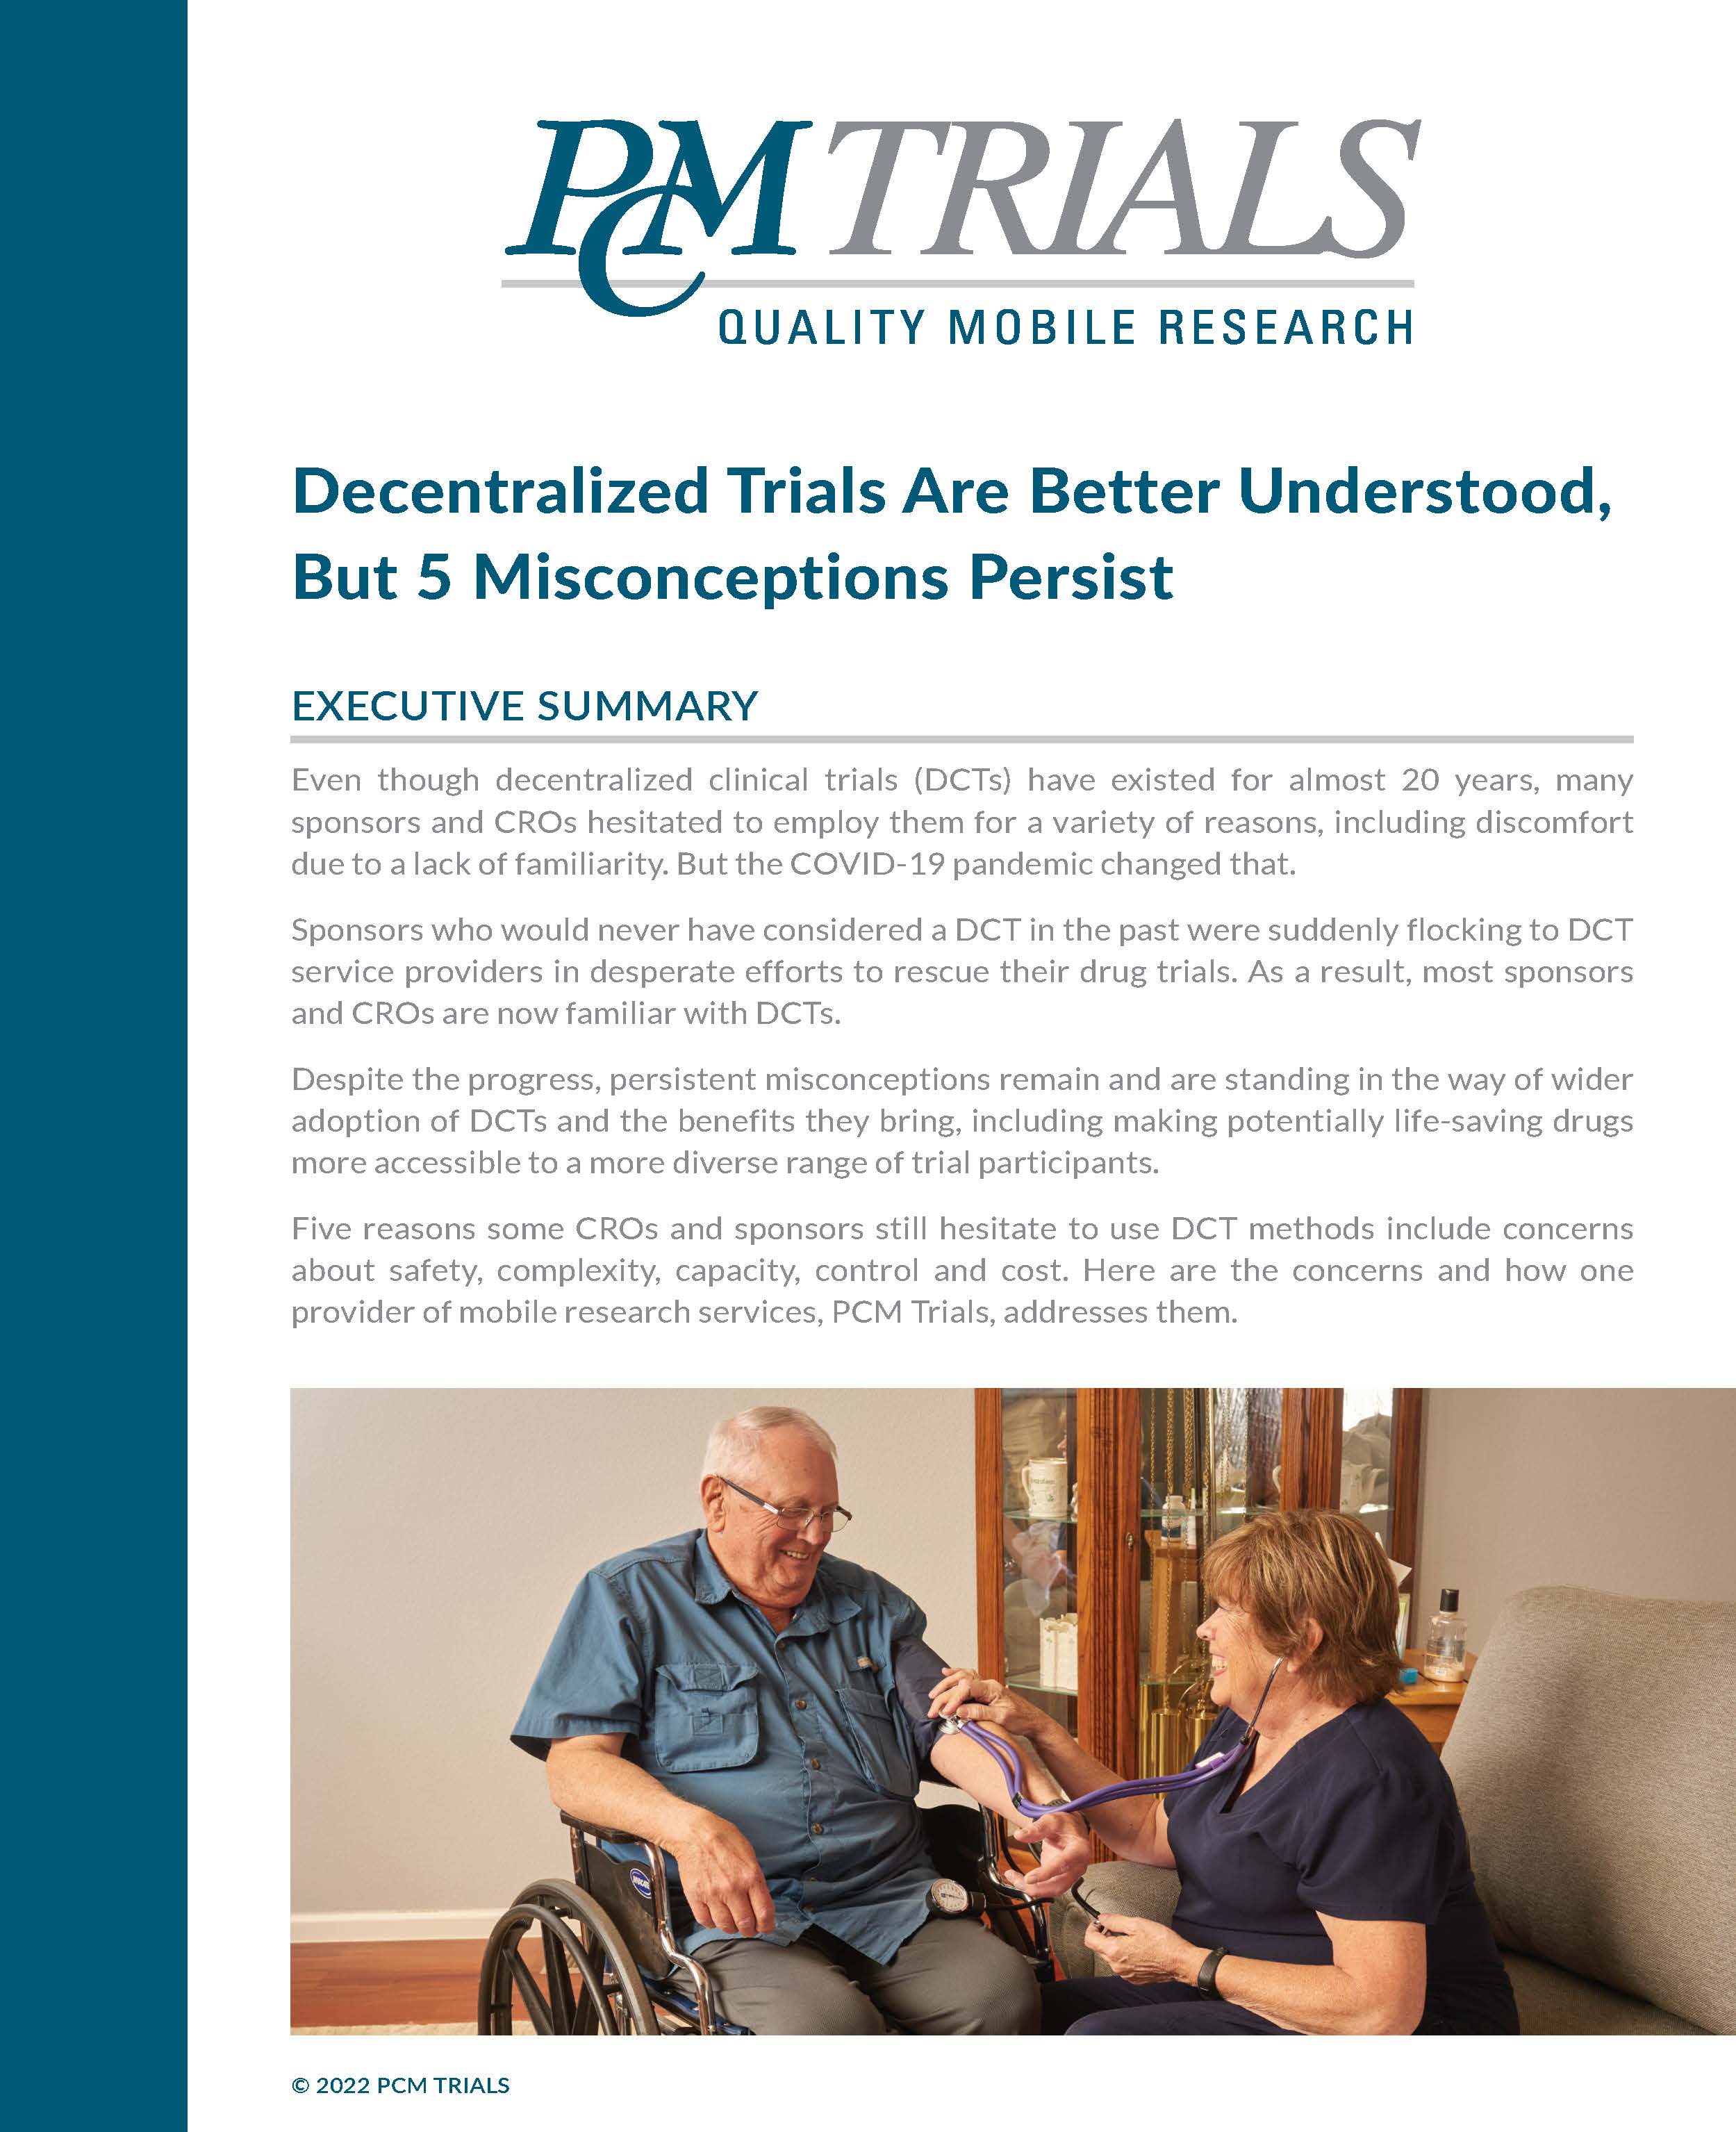 Decentralized Trials Are Better Understood, but 5 Misconceptions Persist
